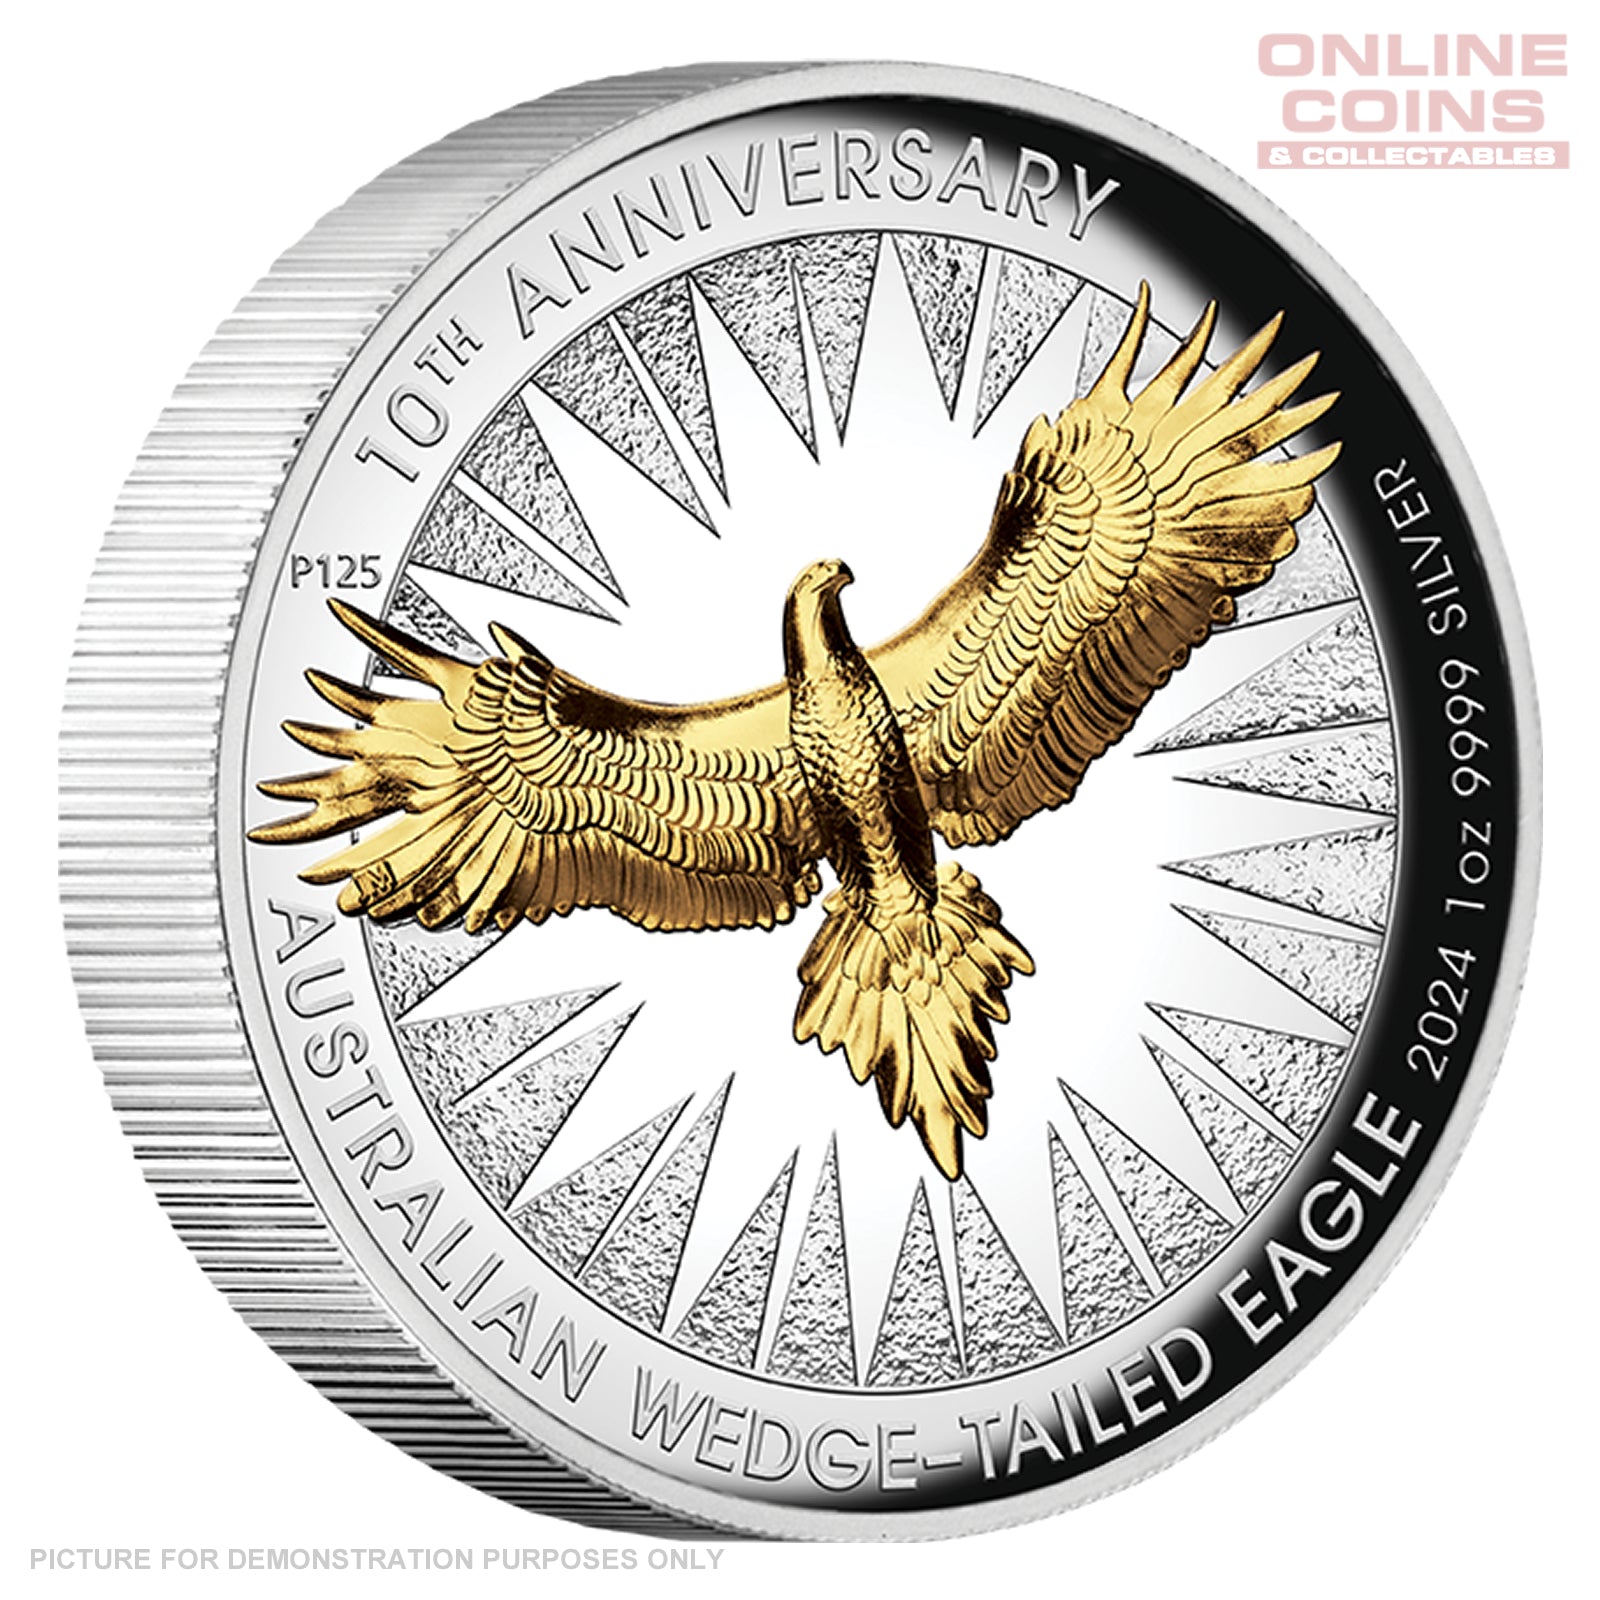 2024 Perth Mint 1oz Silver Proof High Relief GILDED Coin - Wedge-Tailed Eagle 10th Anniversary